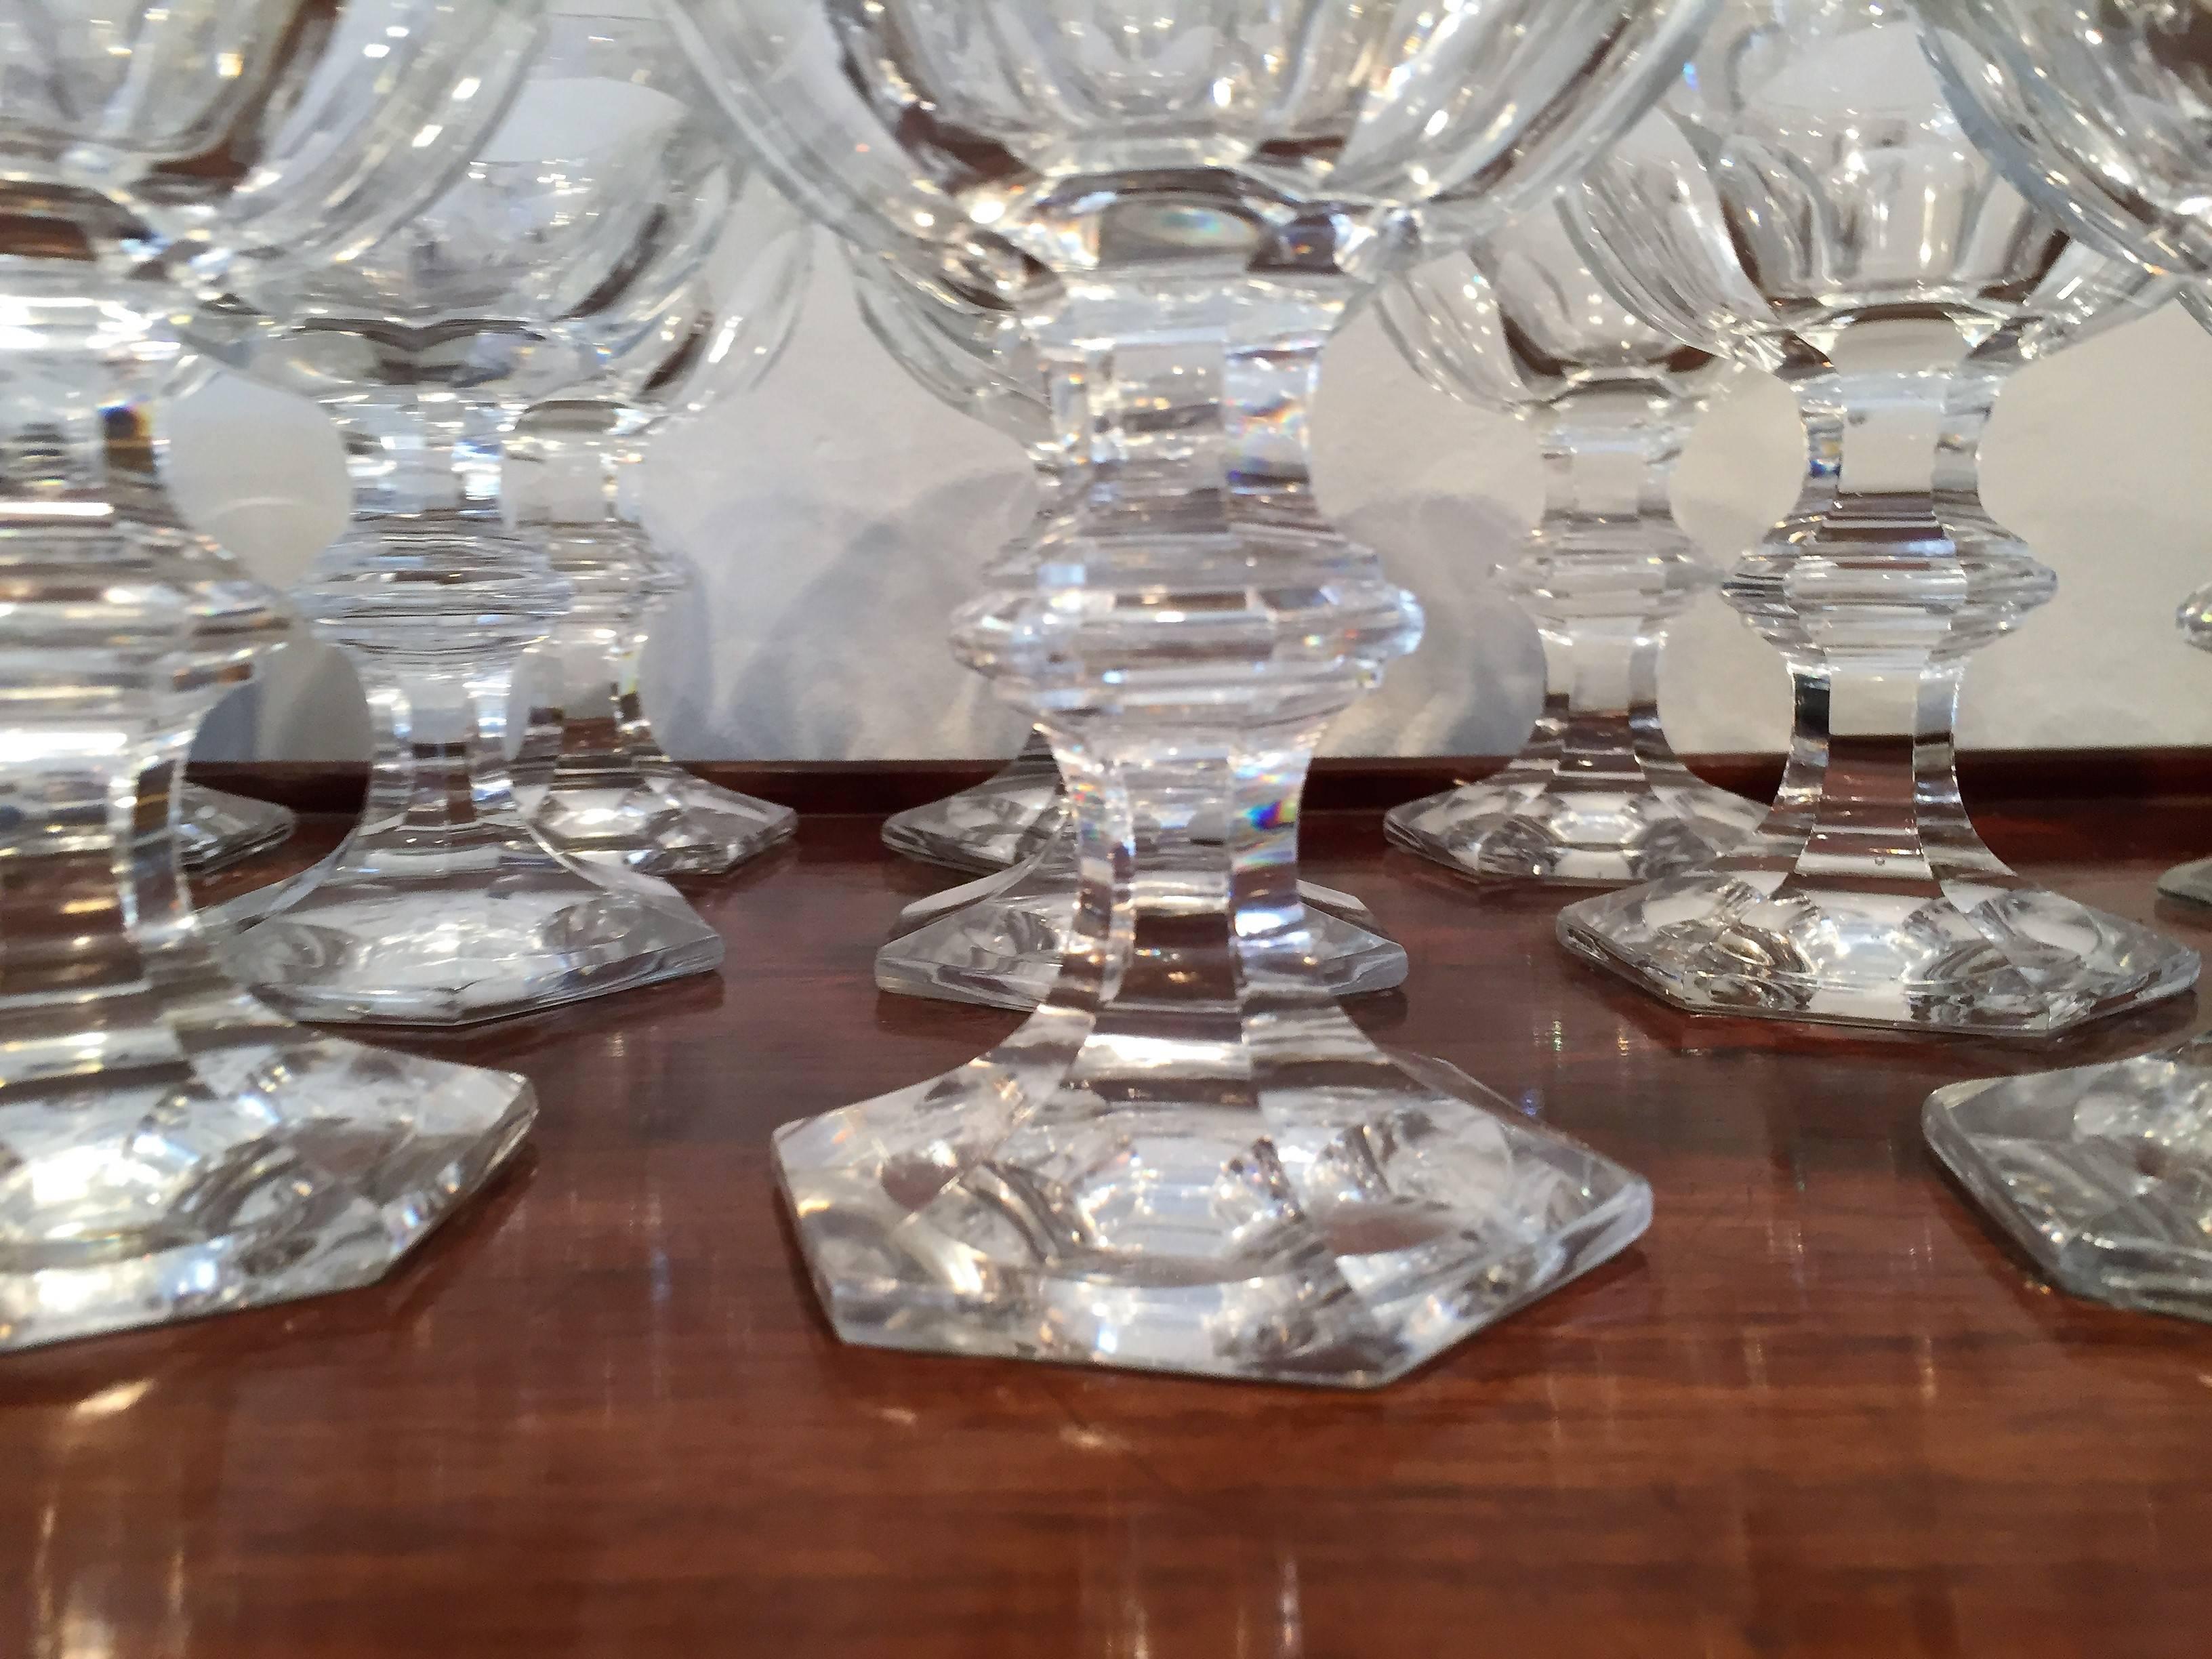 Set of 14 Baccarat Harcourt coupe champagne.
These coupe of champagne are made in beautiful crystal before 1937 (no mark).